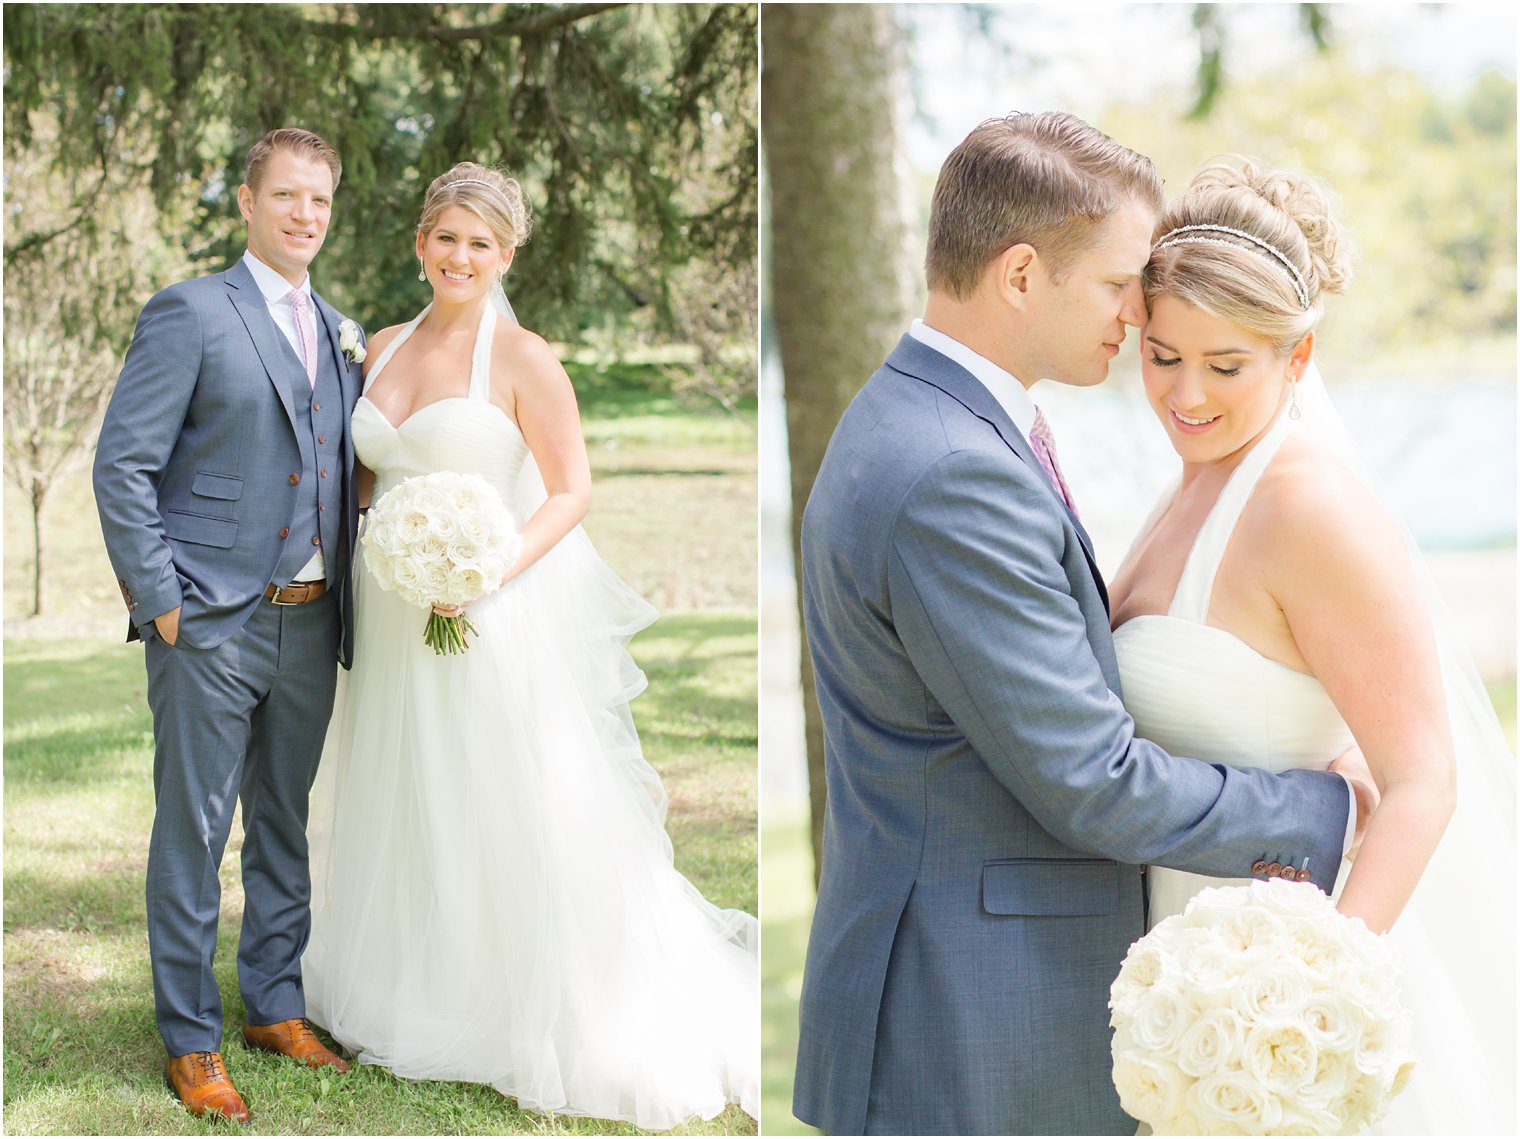 Classic bride and groom portraits at Windows on the Water at Frogbridge Wedding